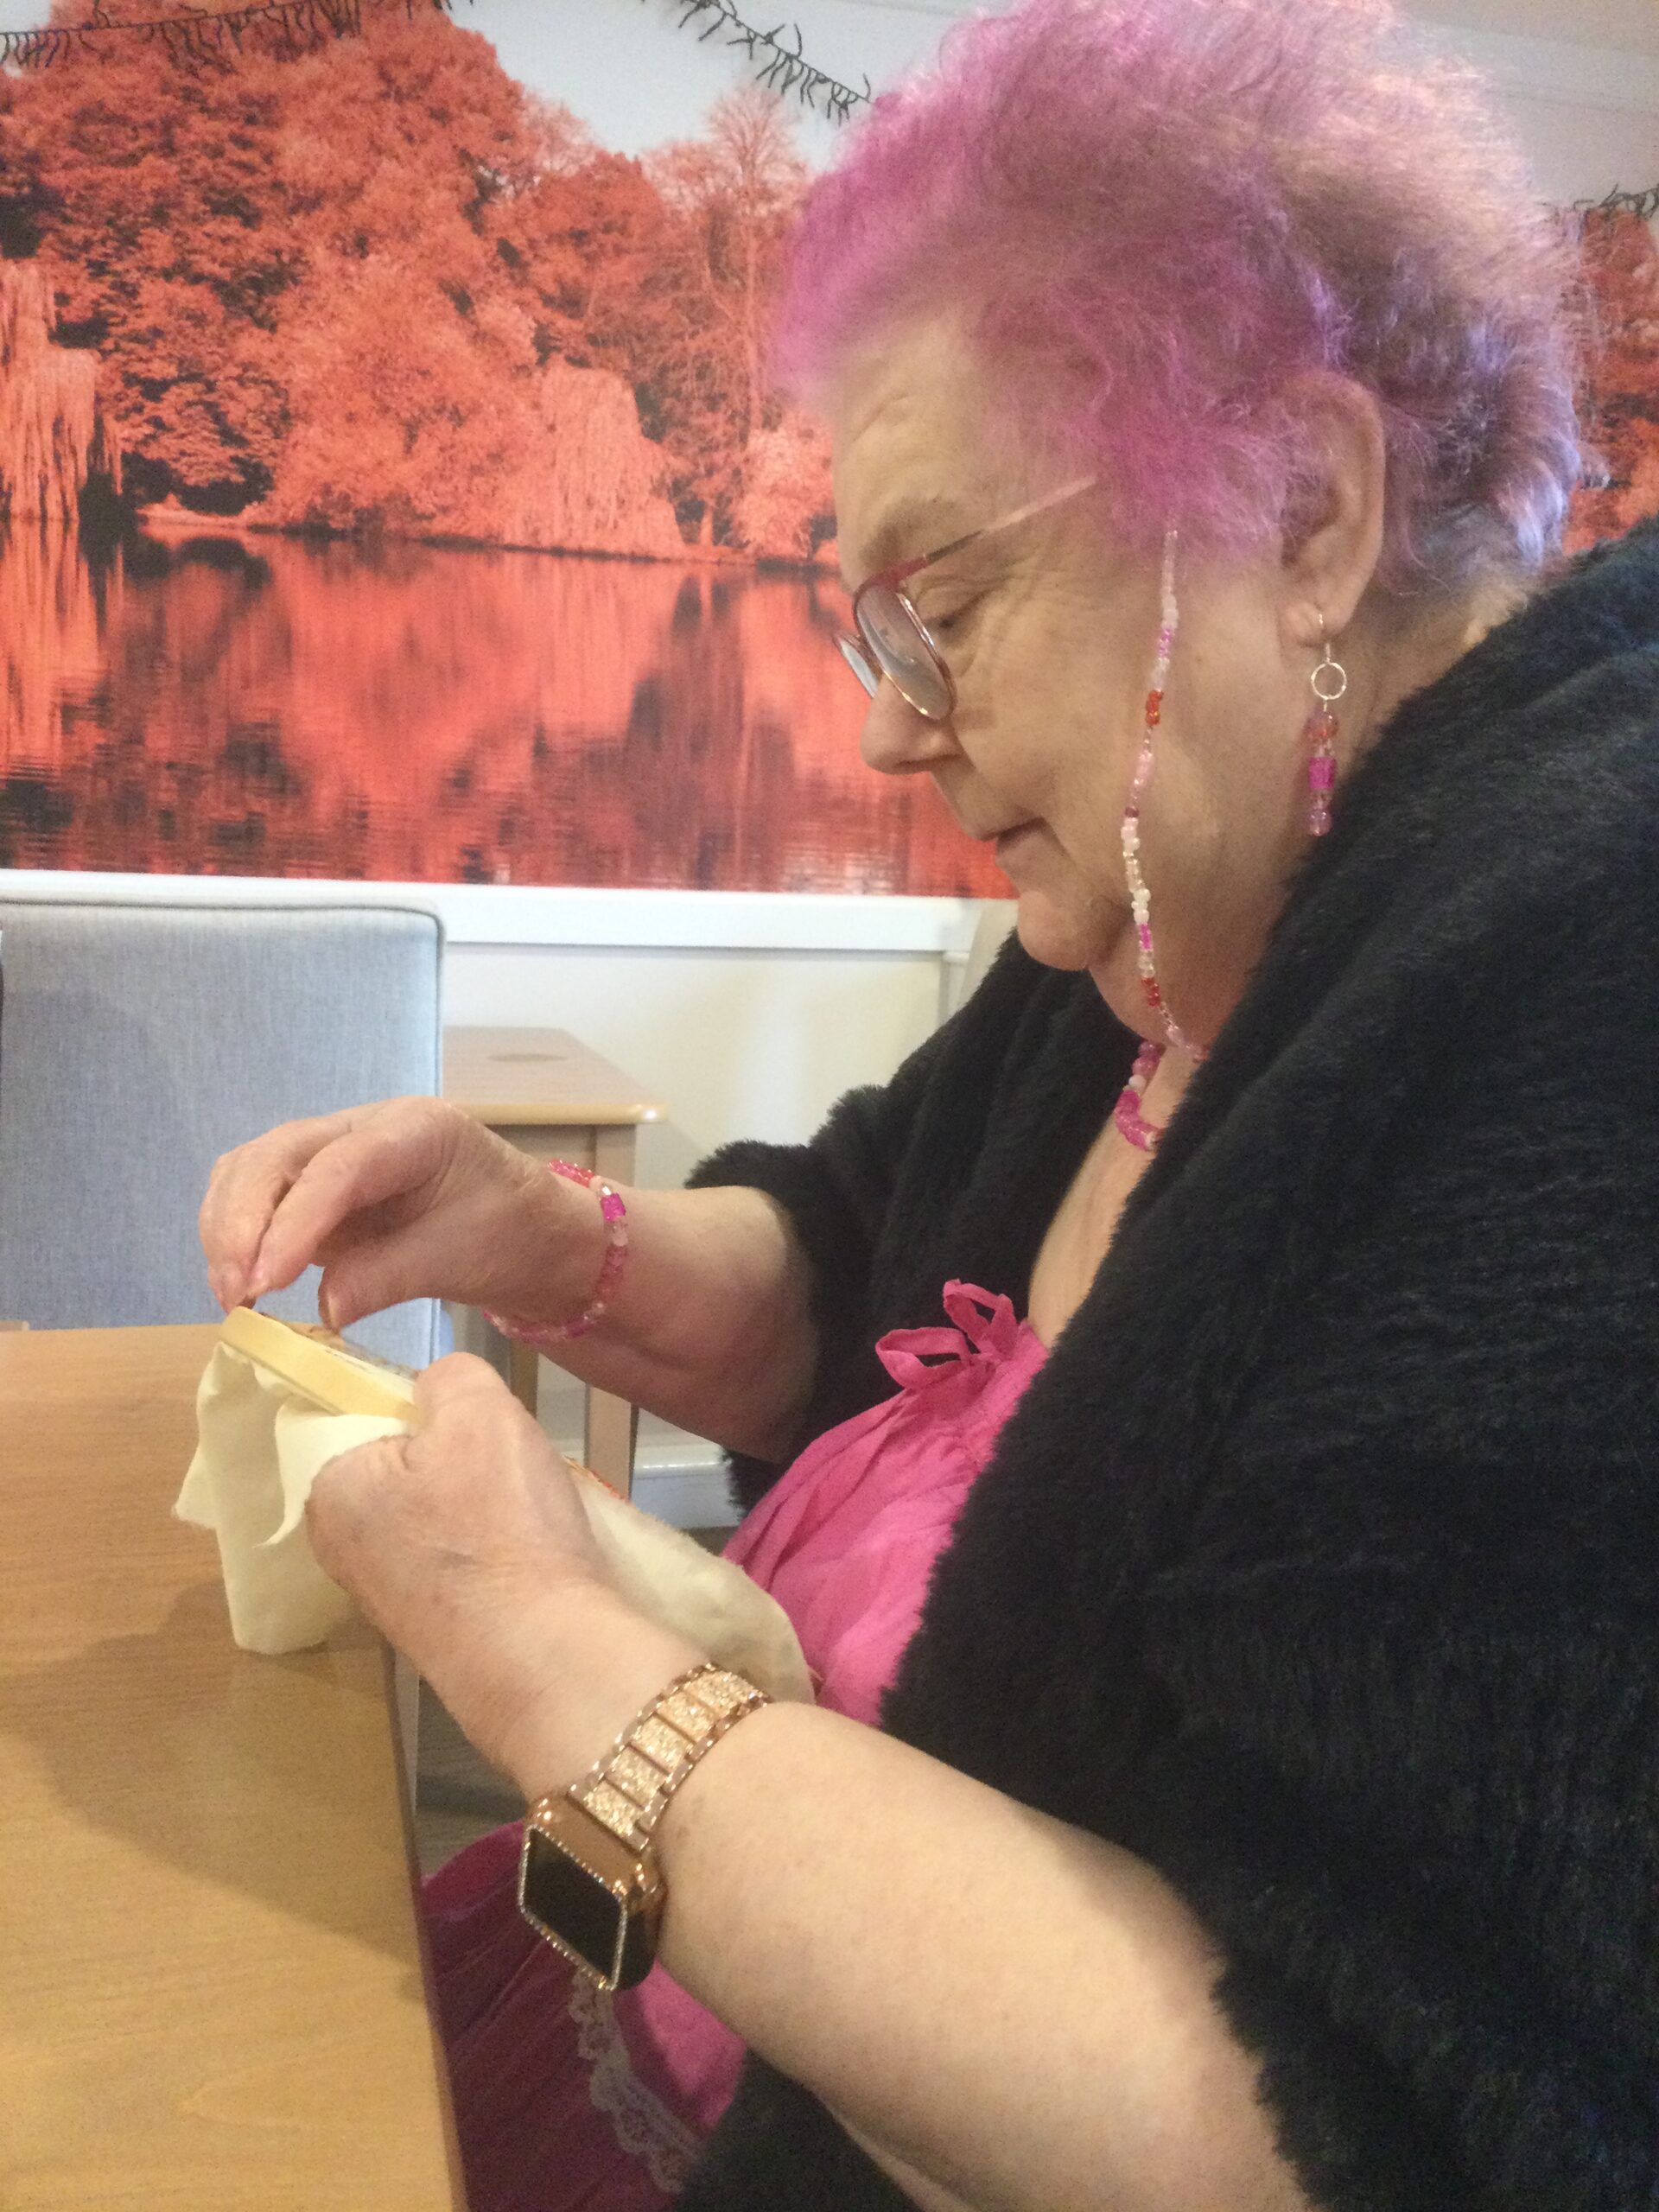 A woman with pink hair and wearing a black shawl is stitching some embroidery